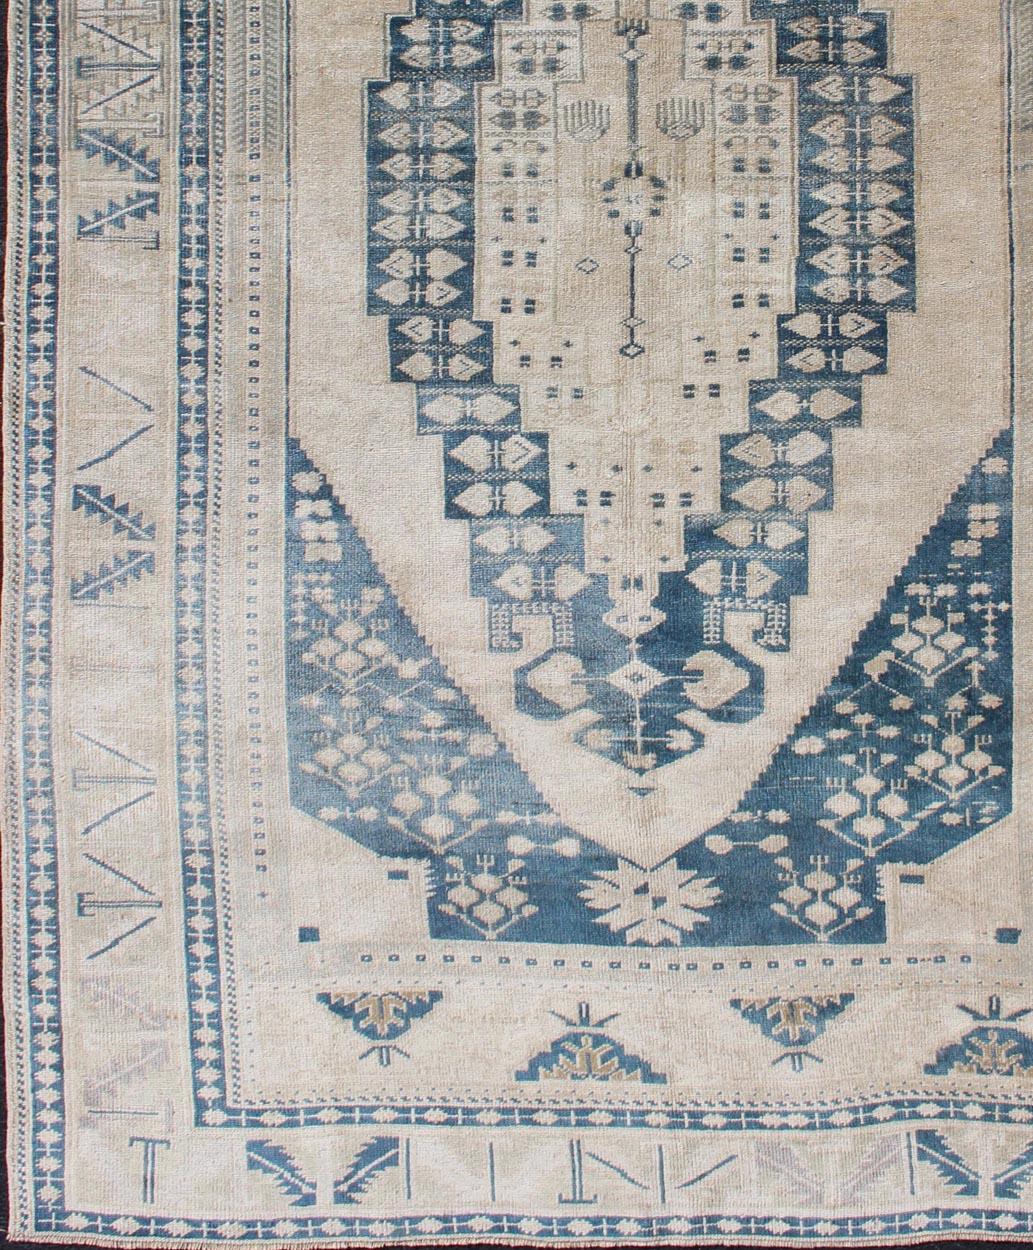 Vintage Turkish Oushak rug with Central Medallion in cream and blue, rug/TU-MTU-4936, Keivan Woven Arts / country of origin / type: Turkey / Oushak, circa 1940

This sublime and enchanting vintage rug, a gorgeous Oushak rug made in Turkey during